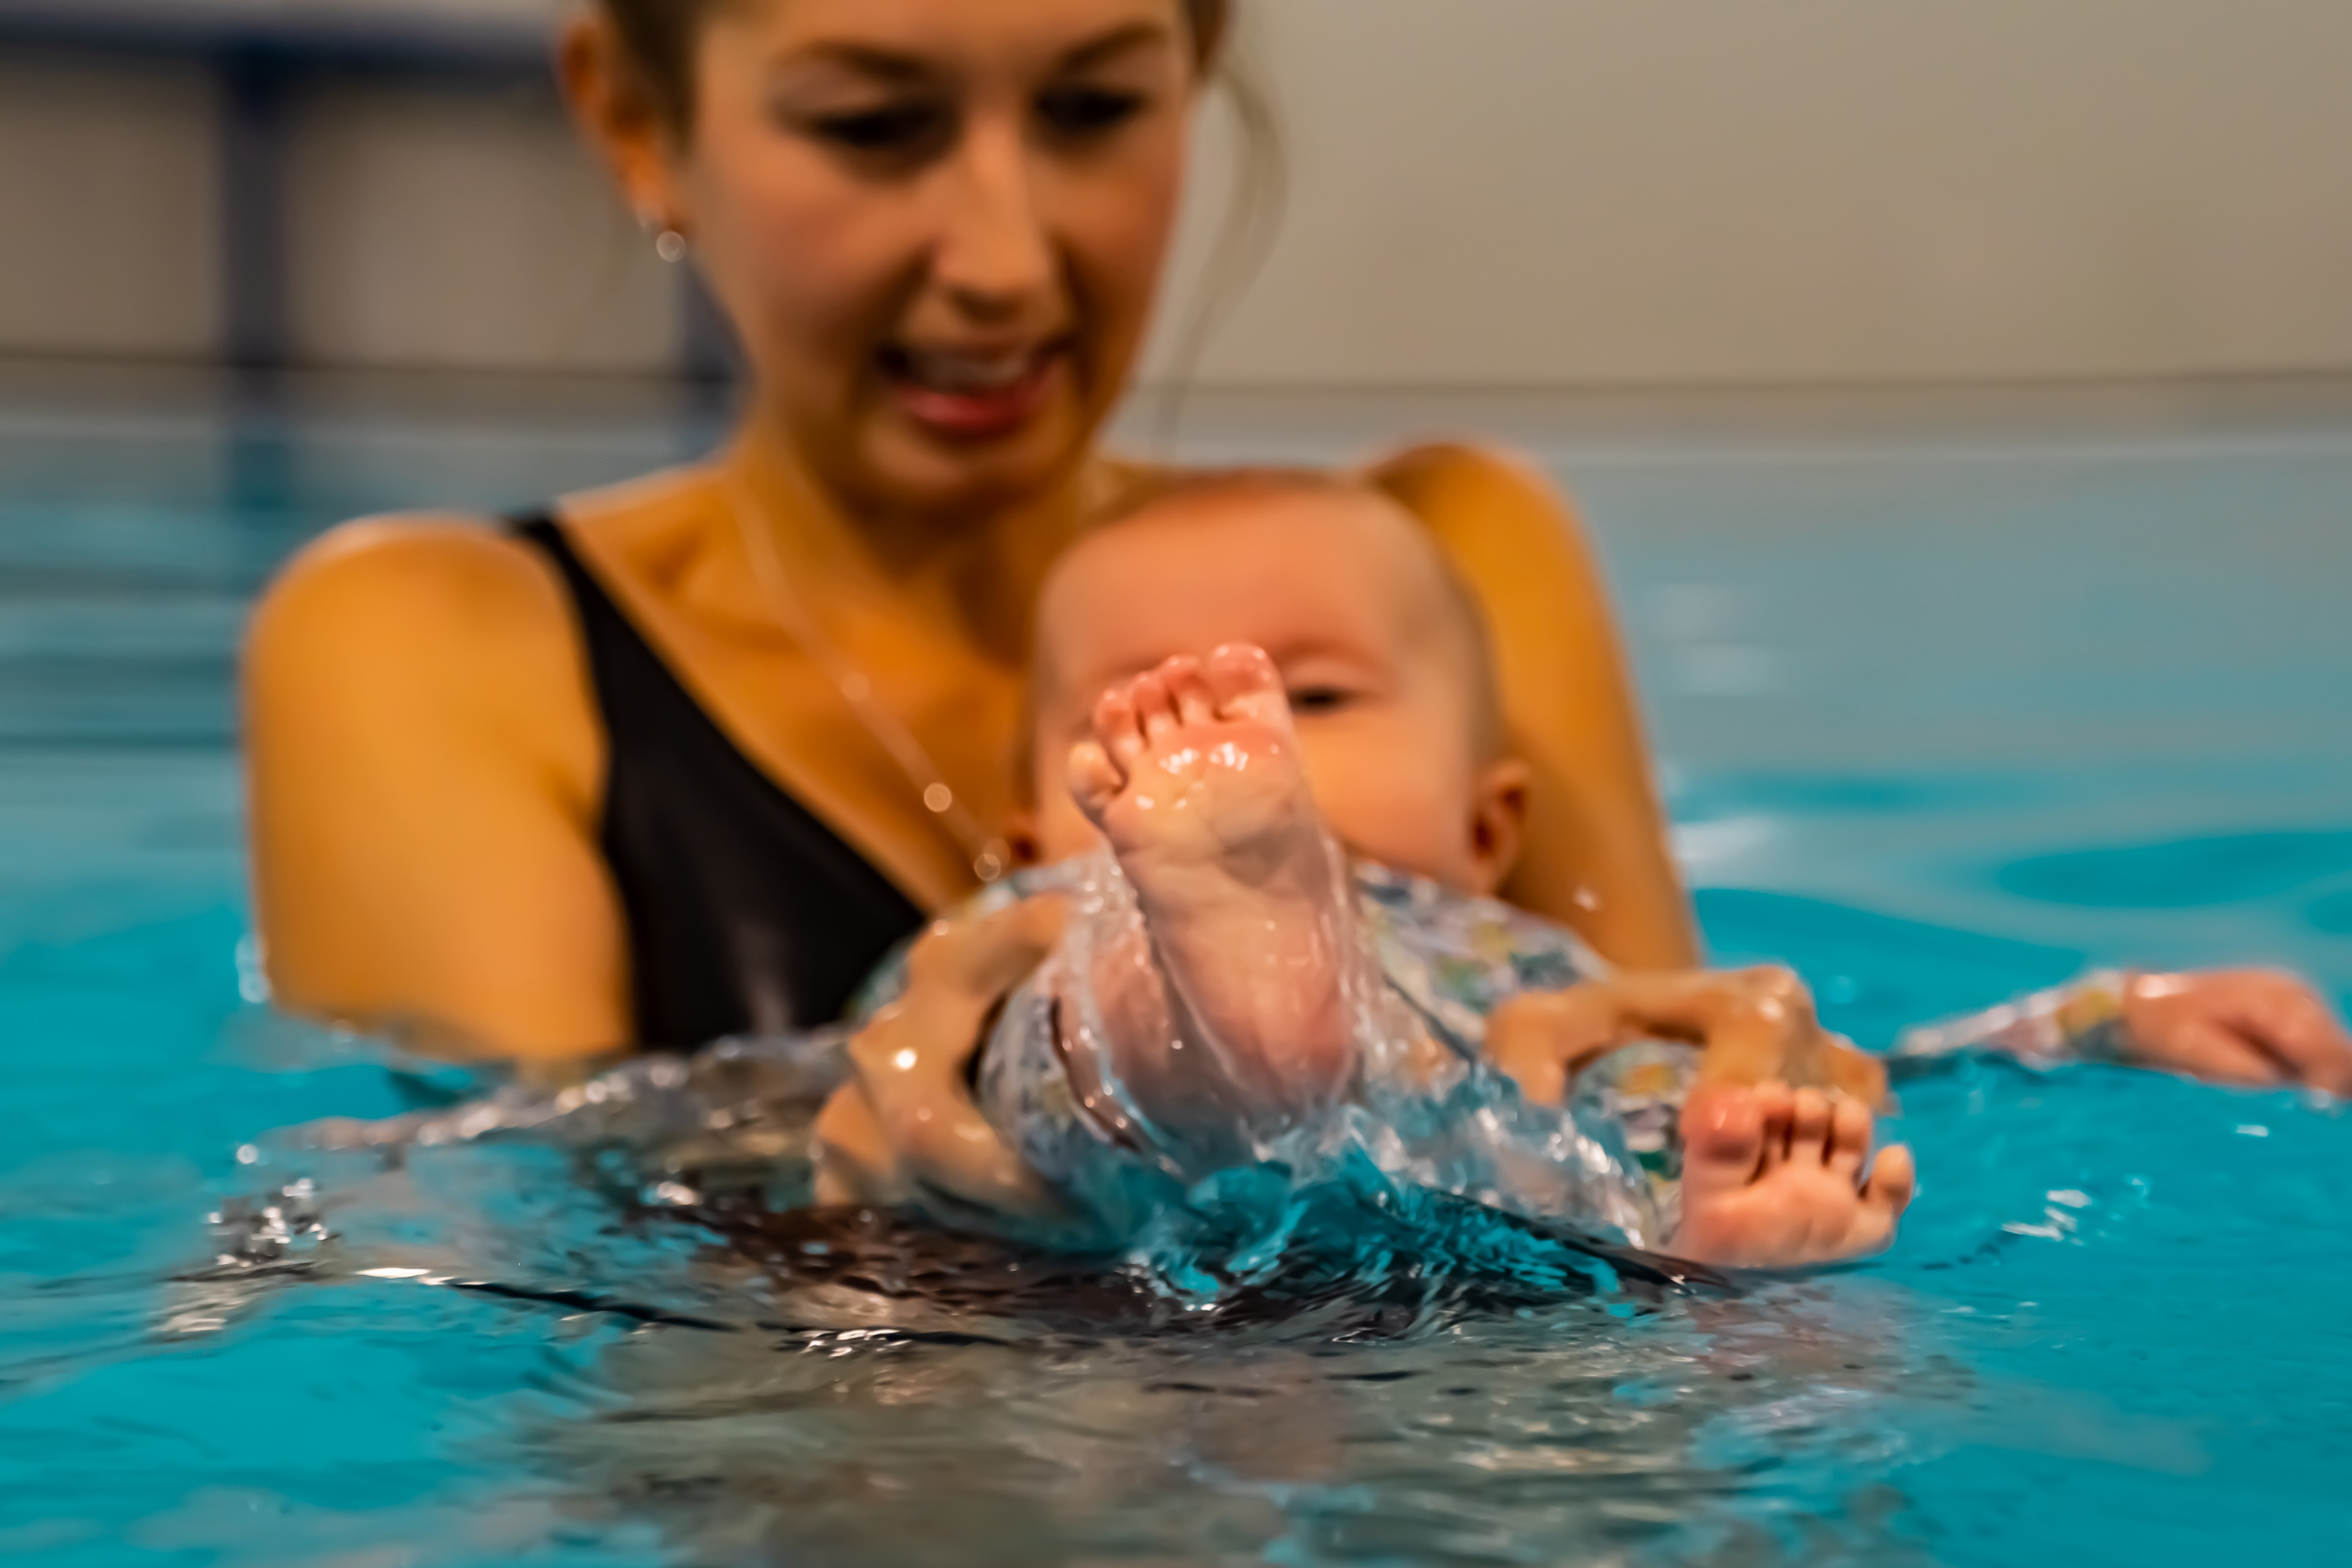 A mum supports her baby in the swimming pool as they lie back and kick their legs